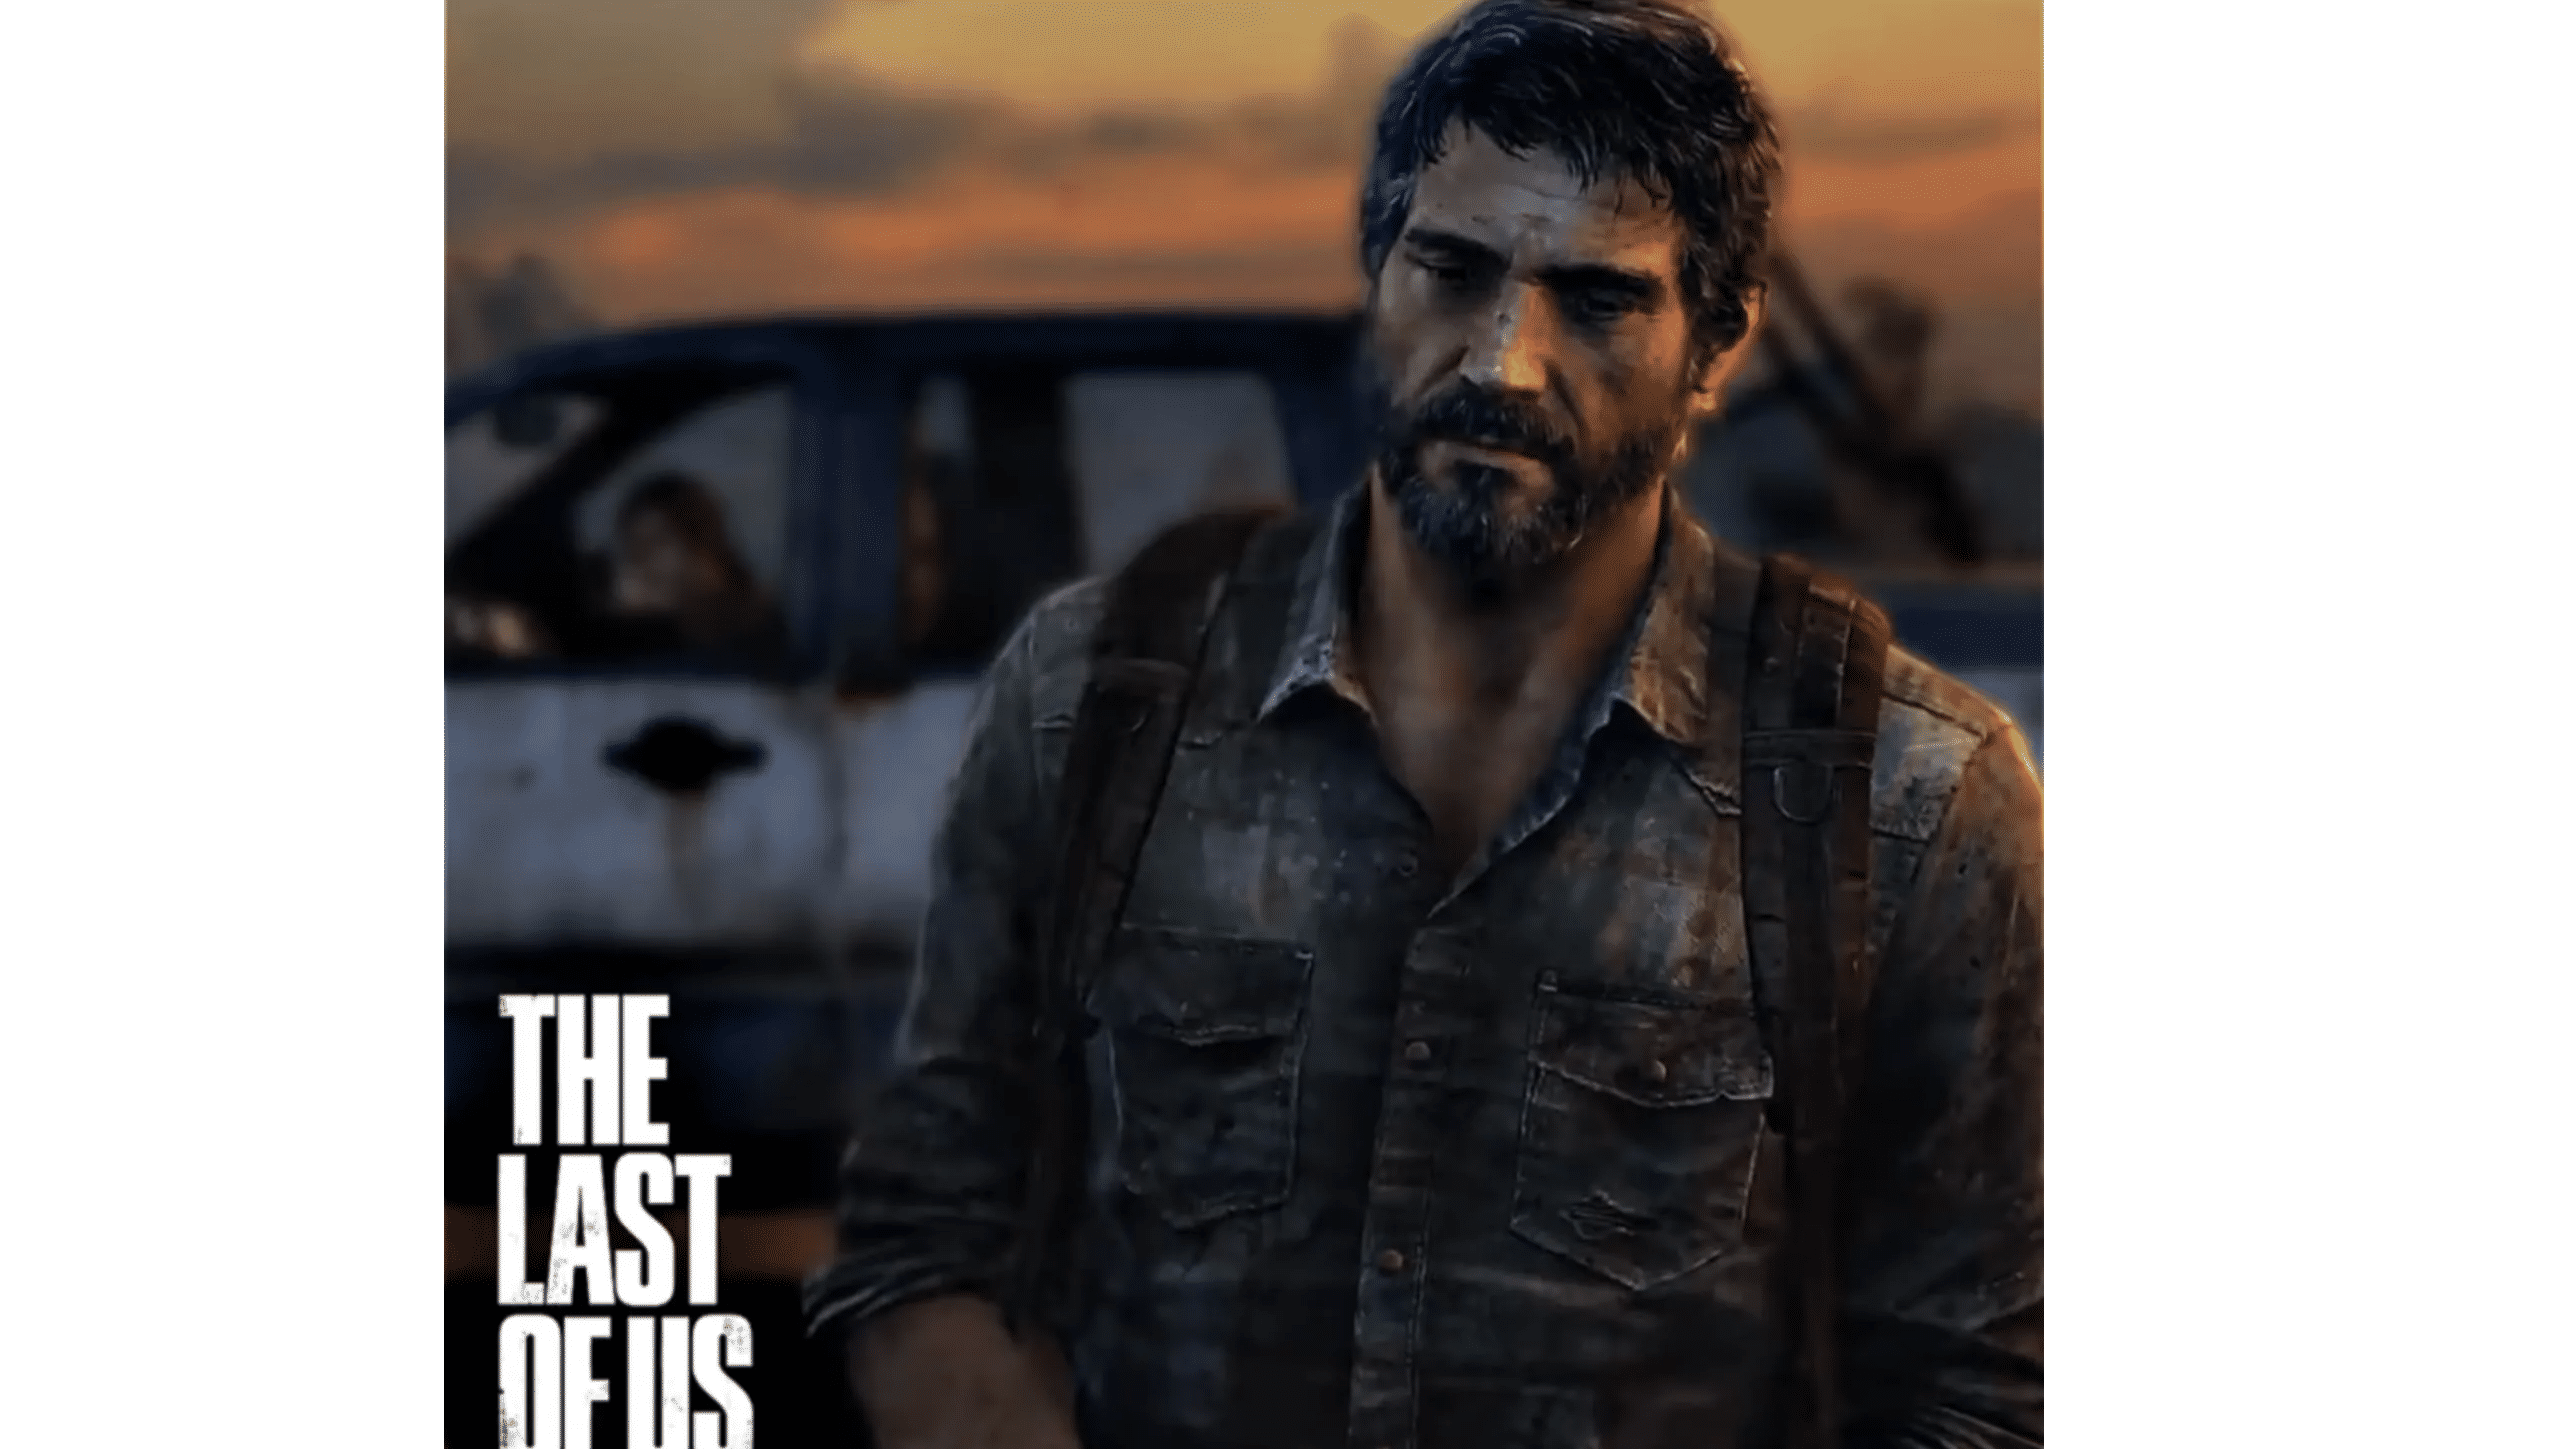 The Last Of Us: Confirmed actors for HBO’s upcoming show